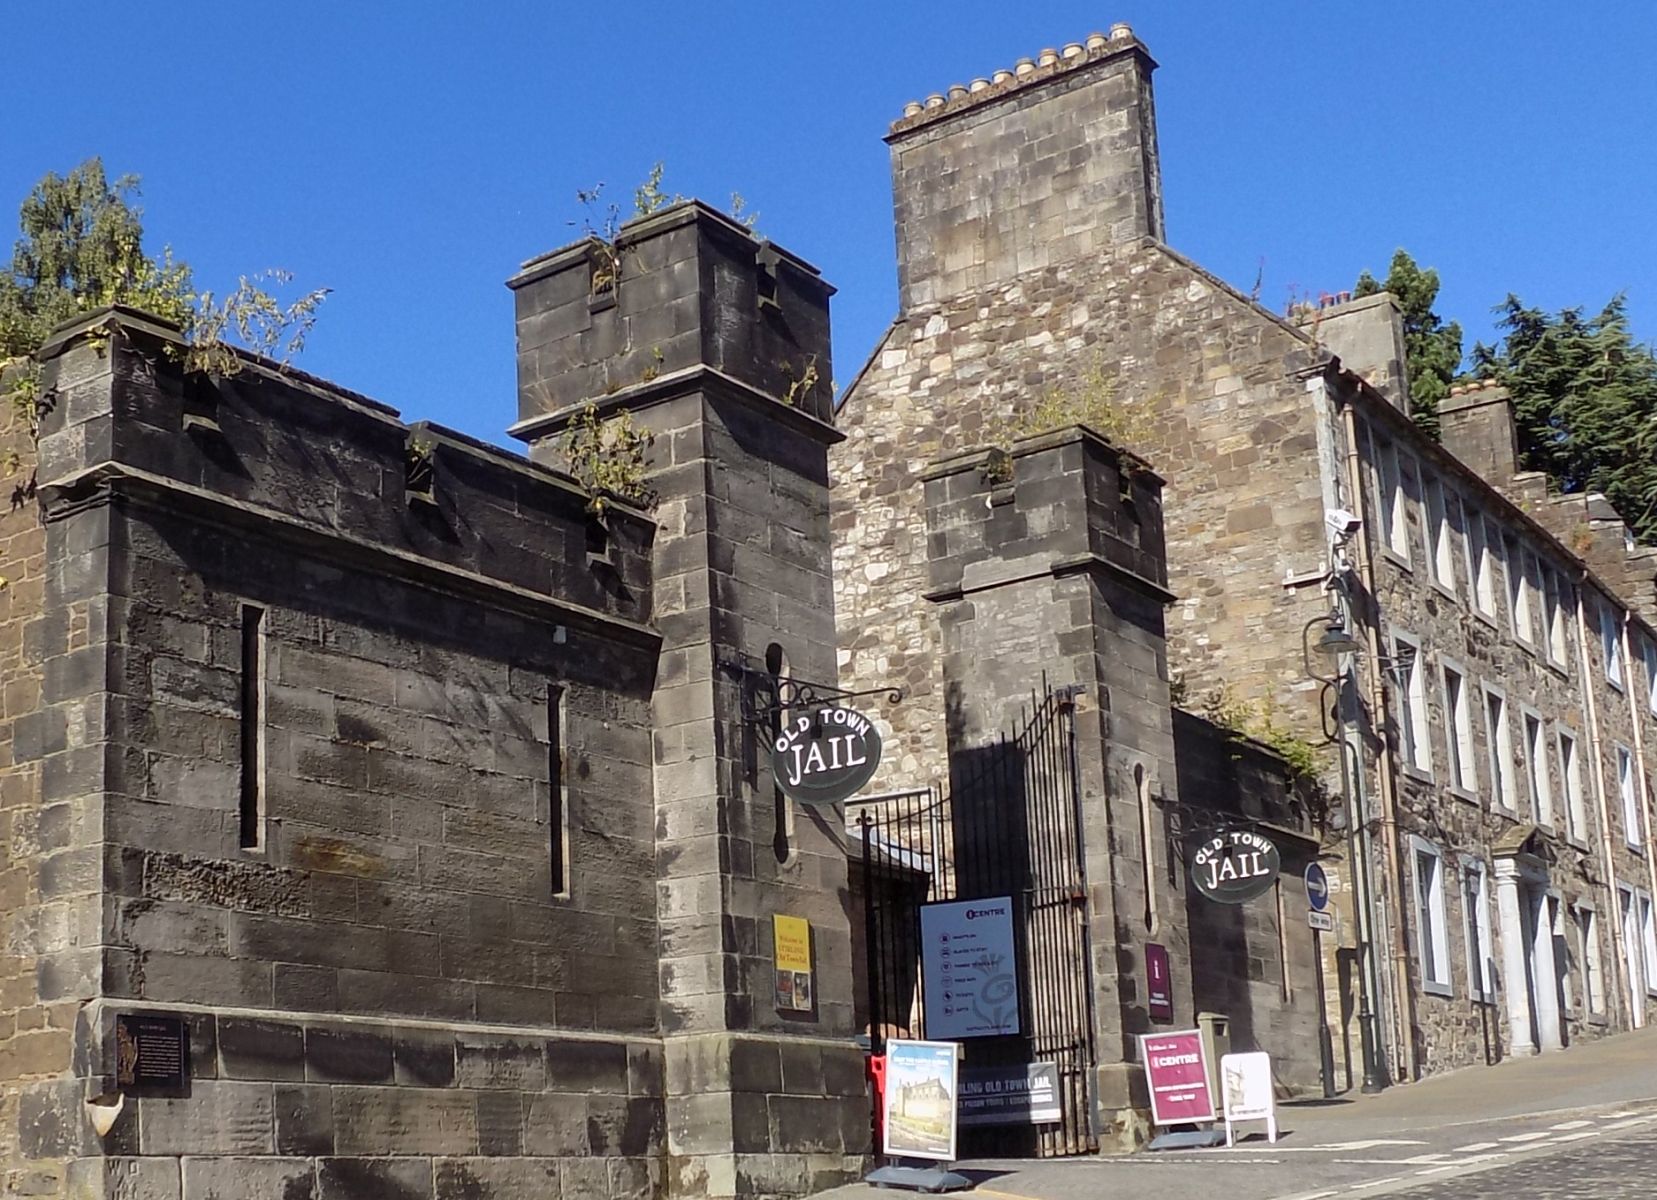 Entrance to the Old Jail in Stirling